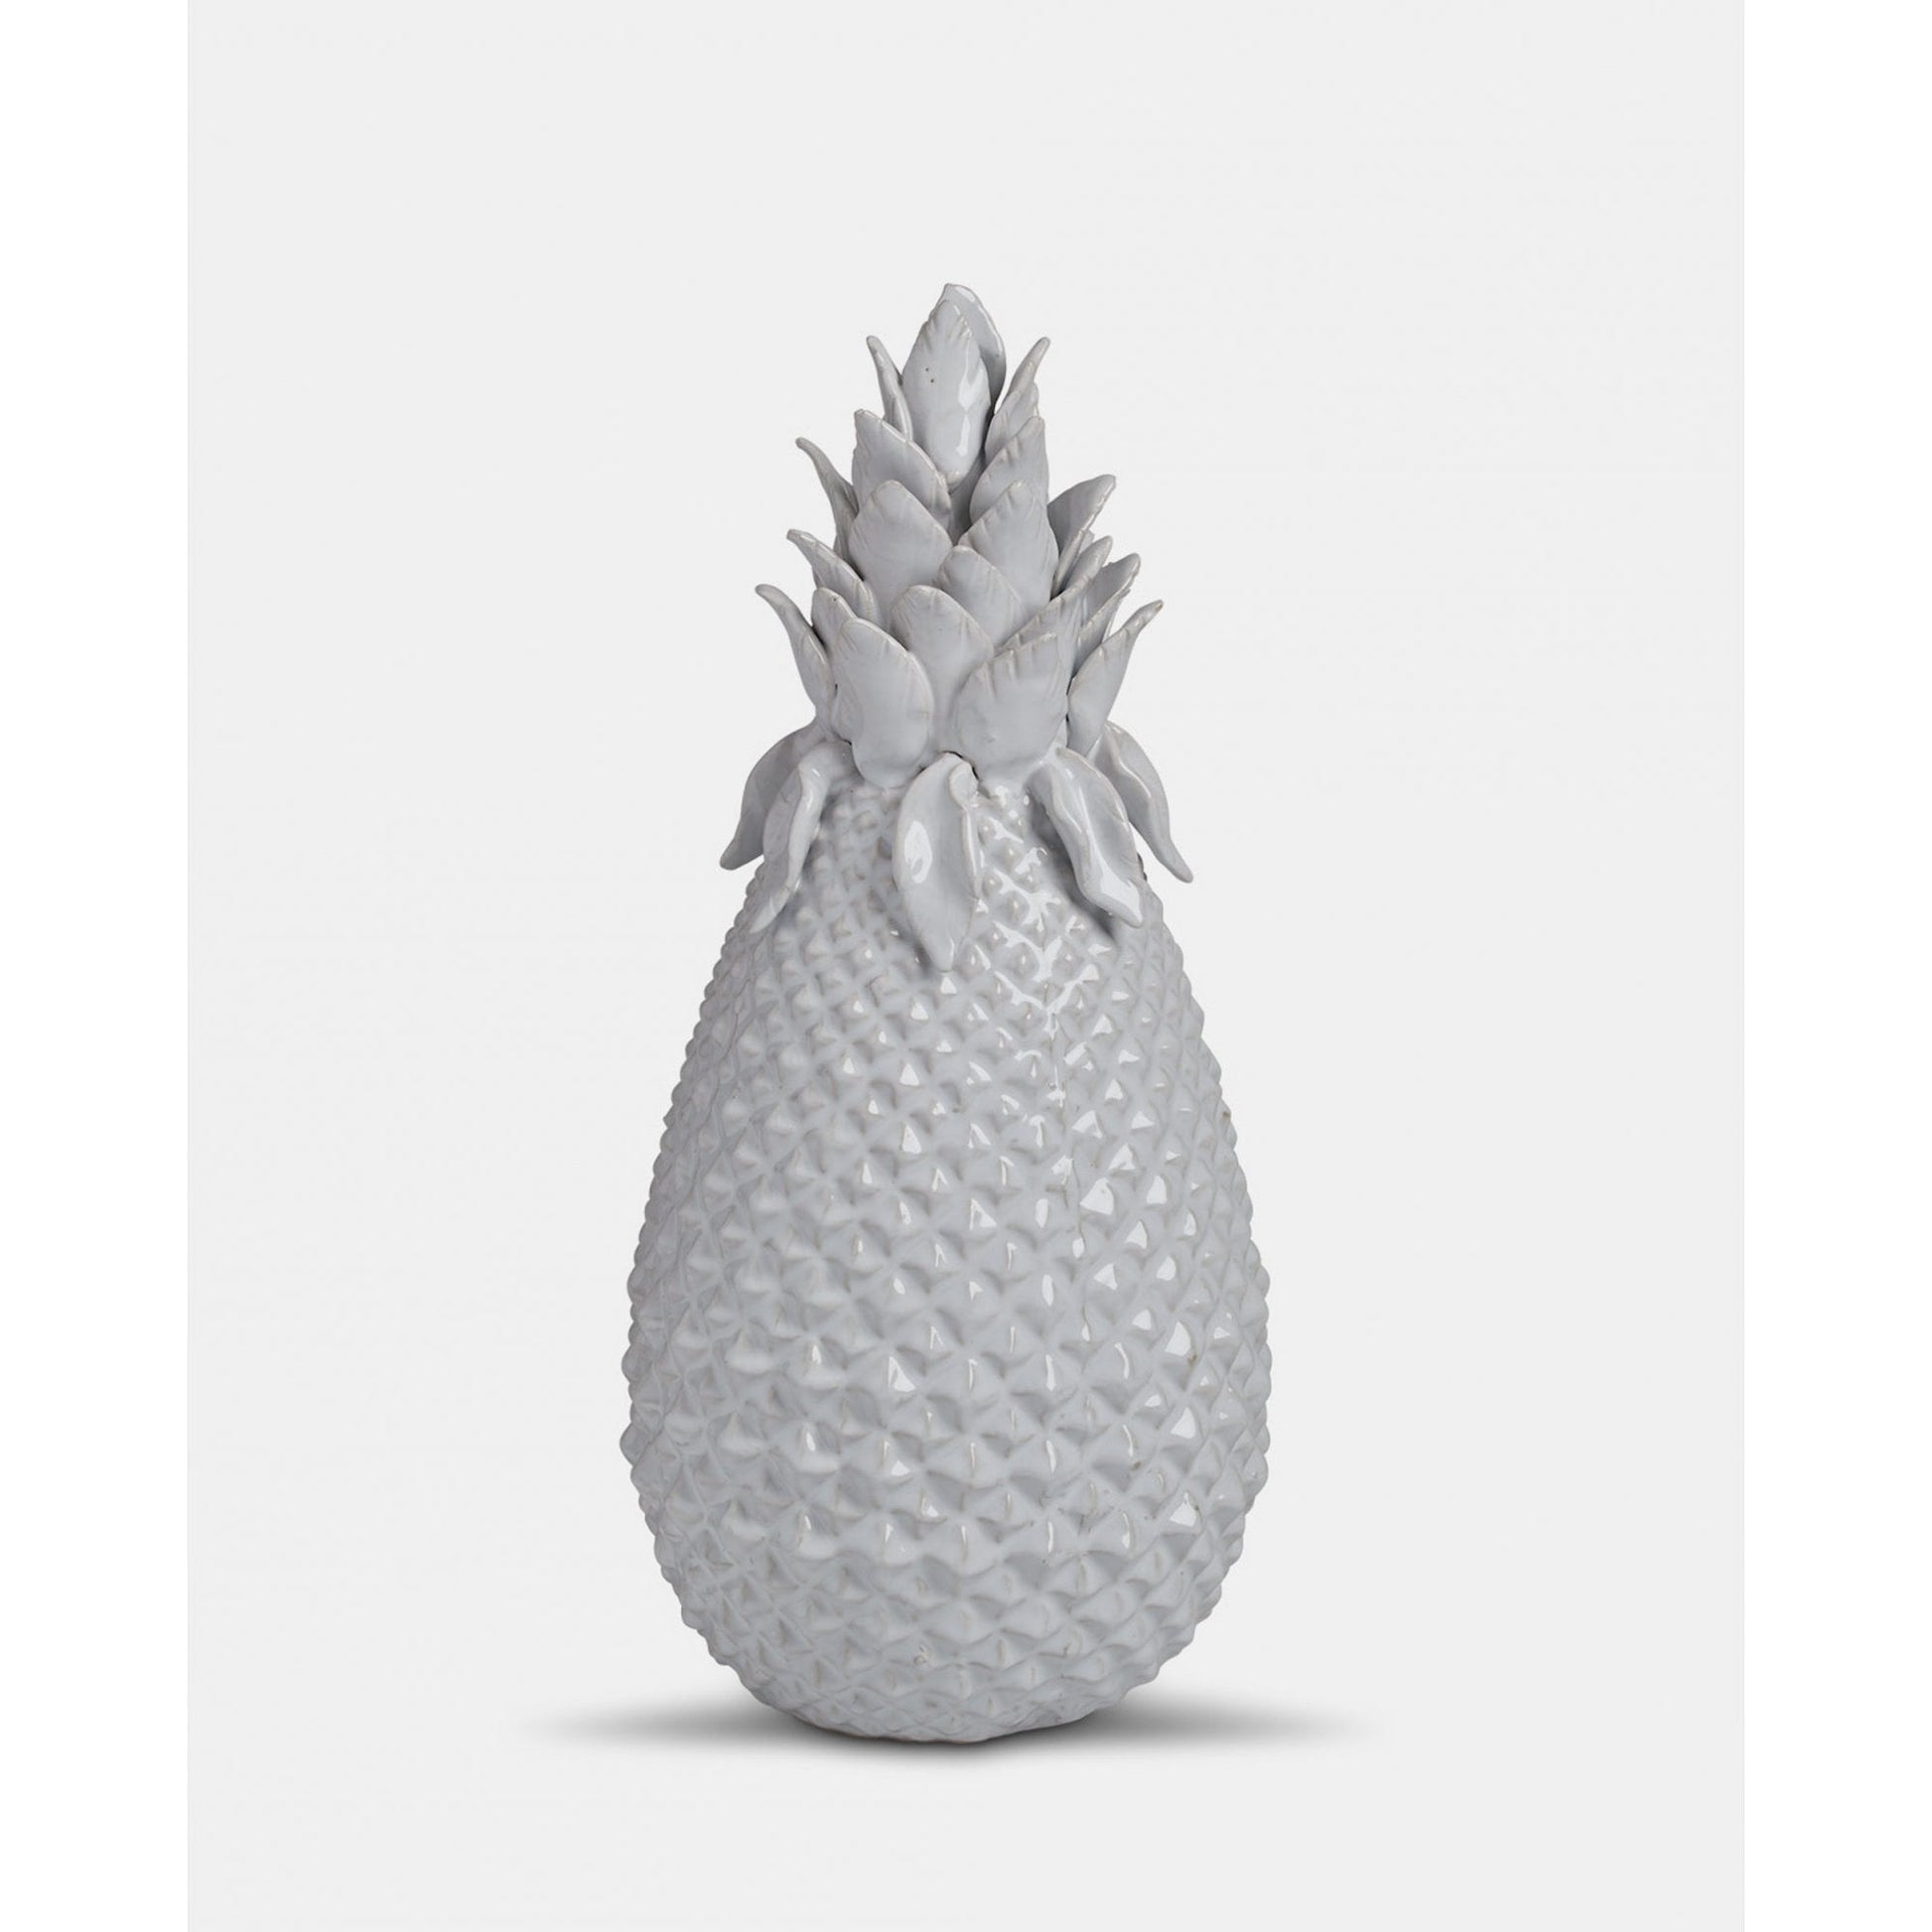 White Ceramic Pineapple Ornament - Elegant Decorative Piece, Perfect Solo or Blend with Other Favorites for a Splash of Color and Texture